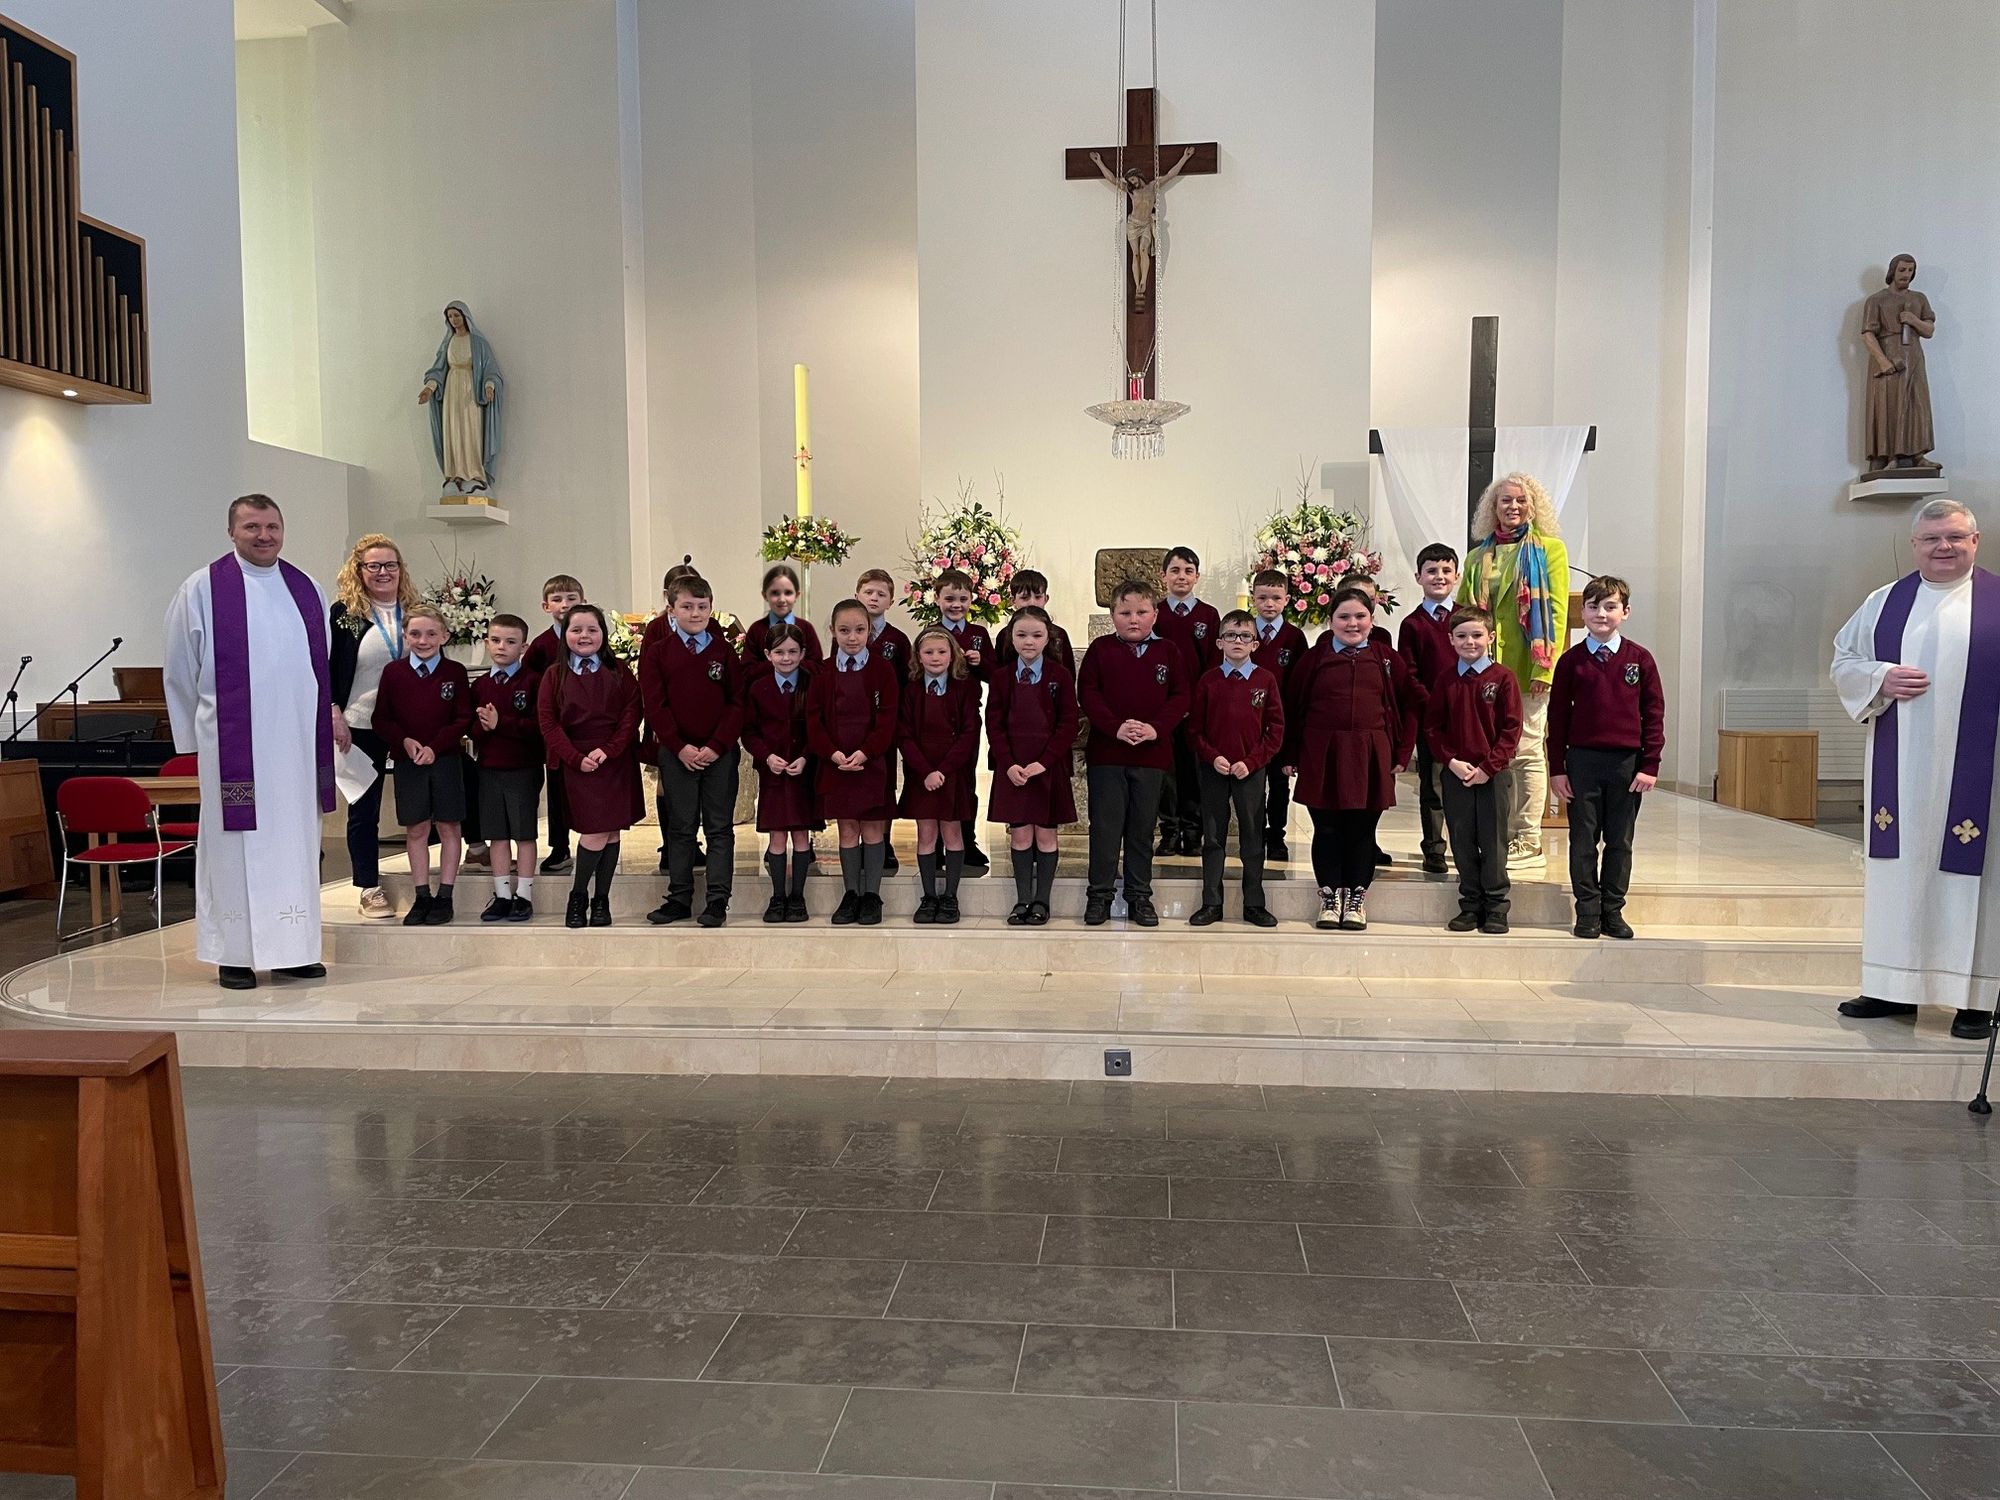 Congratulations to Mrs Doherty’s Year 4C who received the sacrament of Penance yesterday